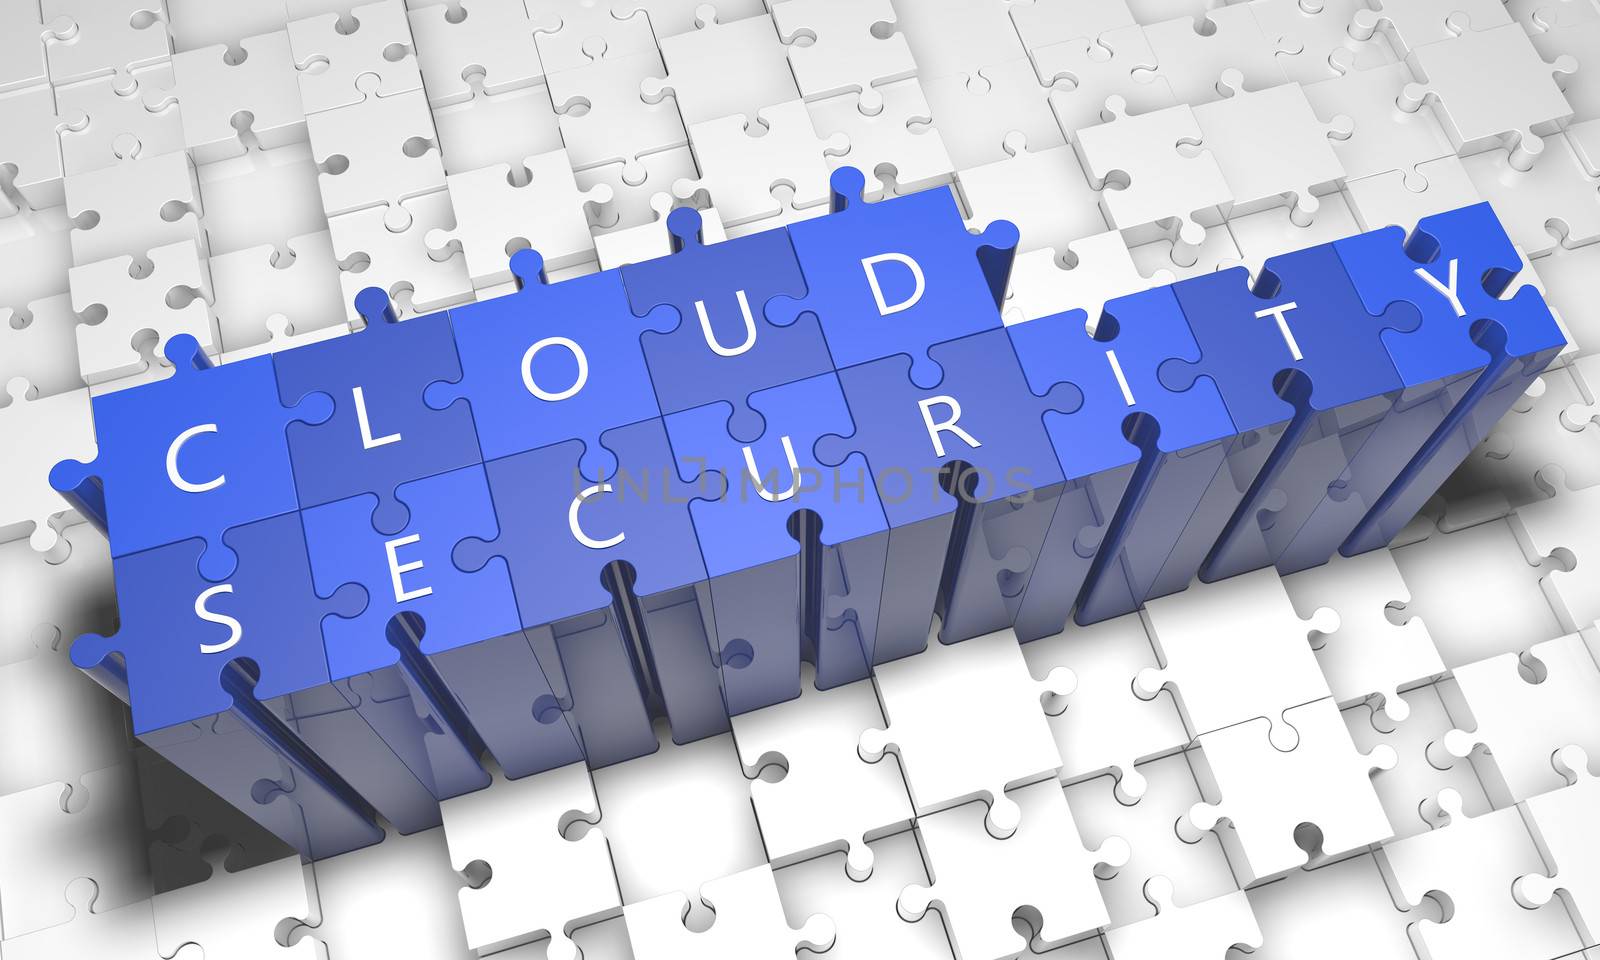 Cloud Security - puzzle 3d render illustration with text on blue jigsaw pieces stick out of white pieces